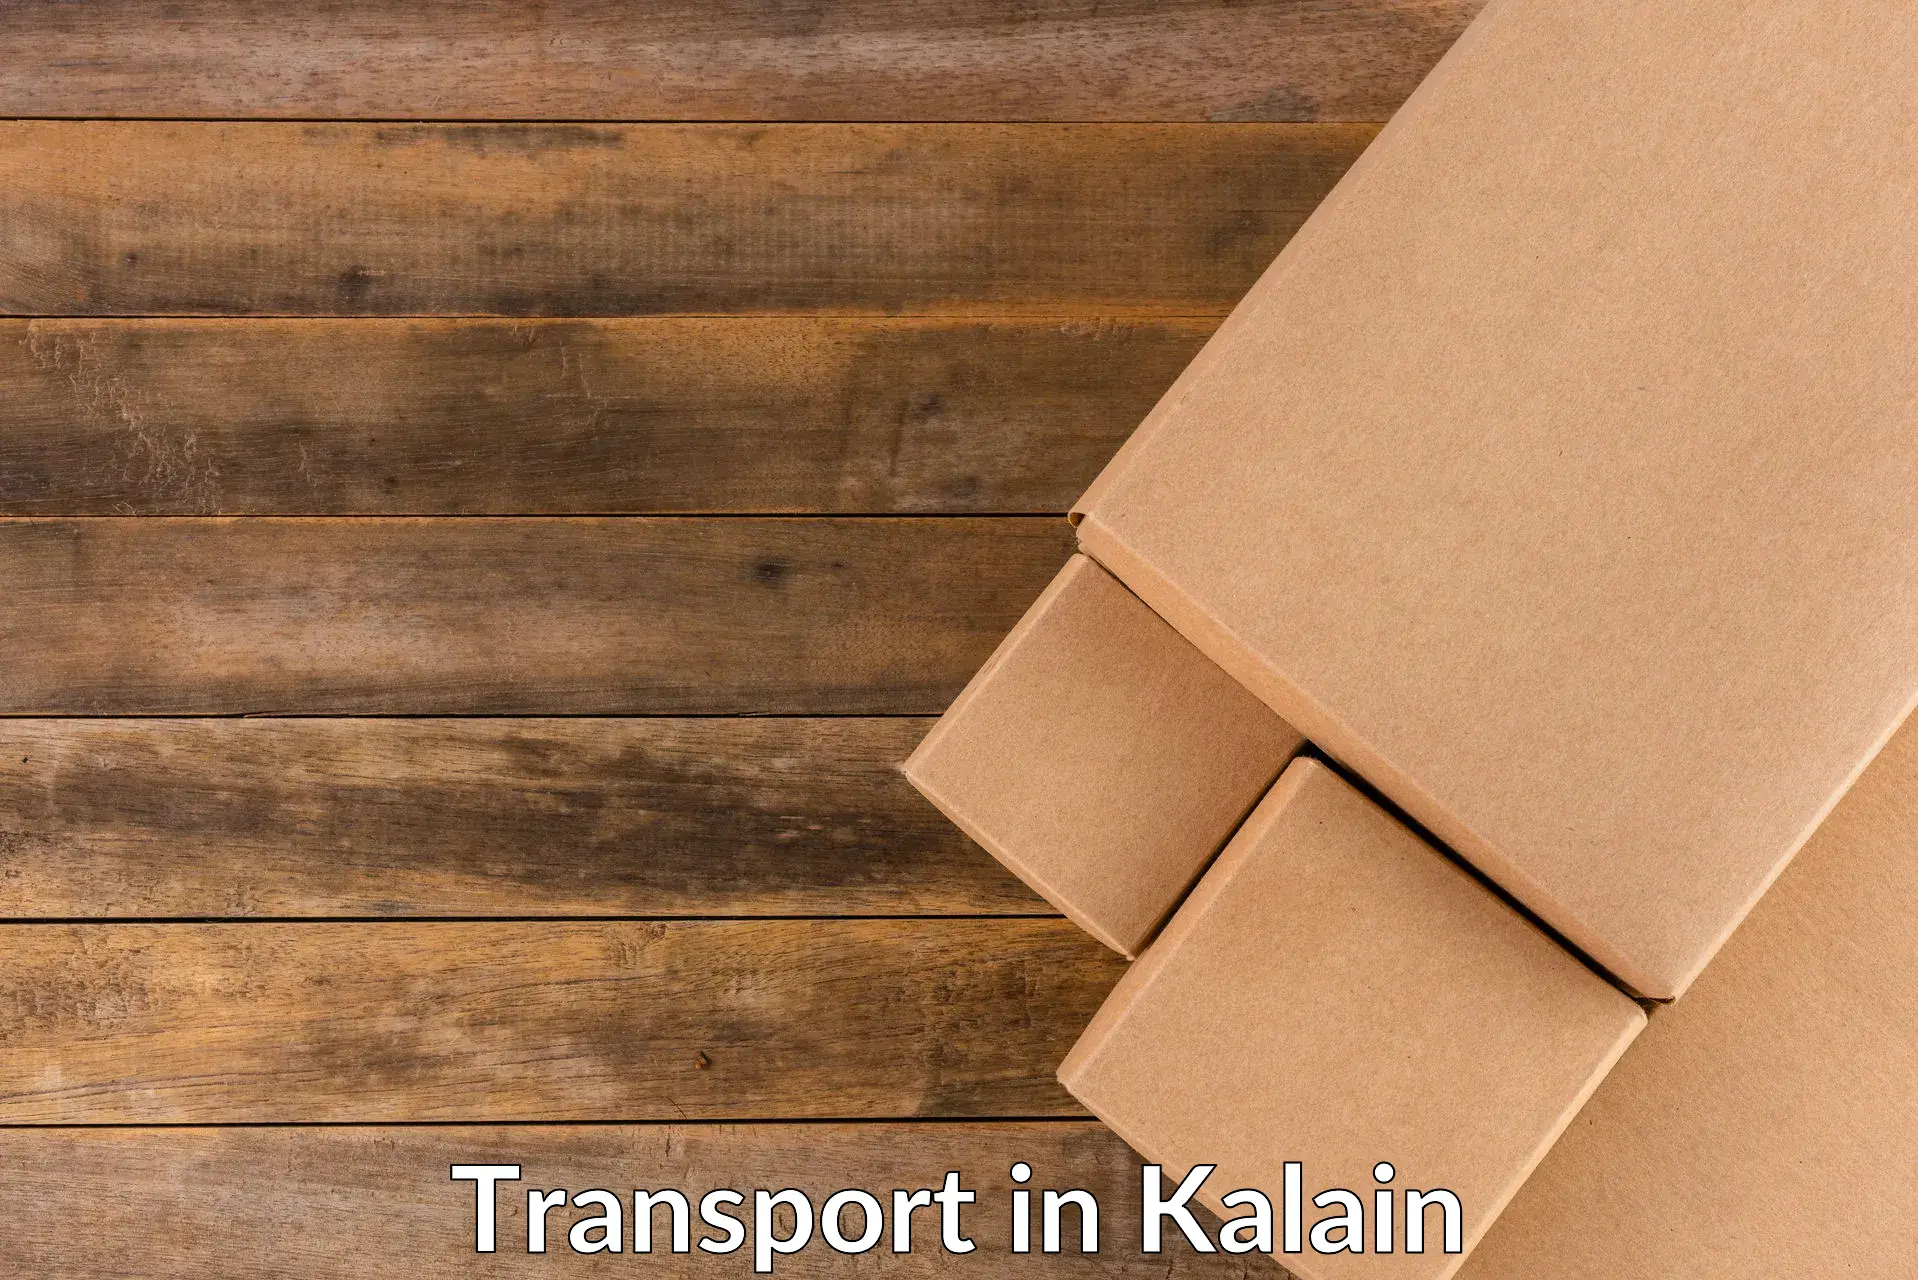 Container transport service in Kalain